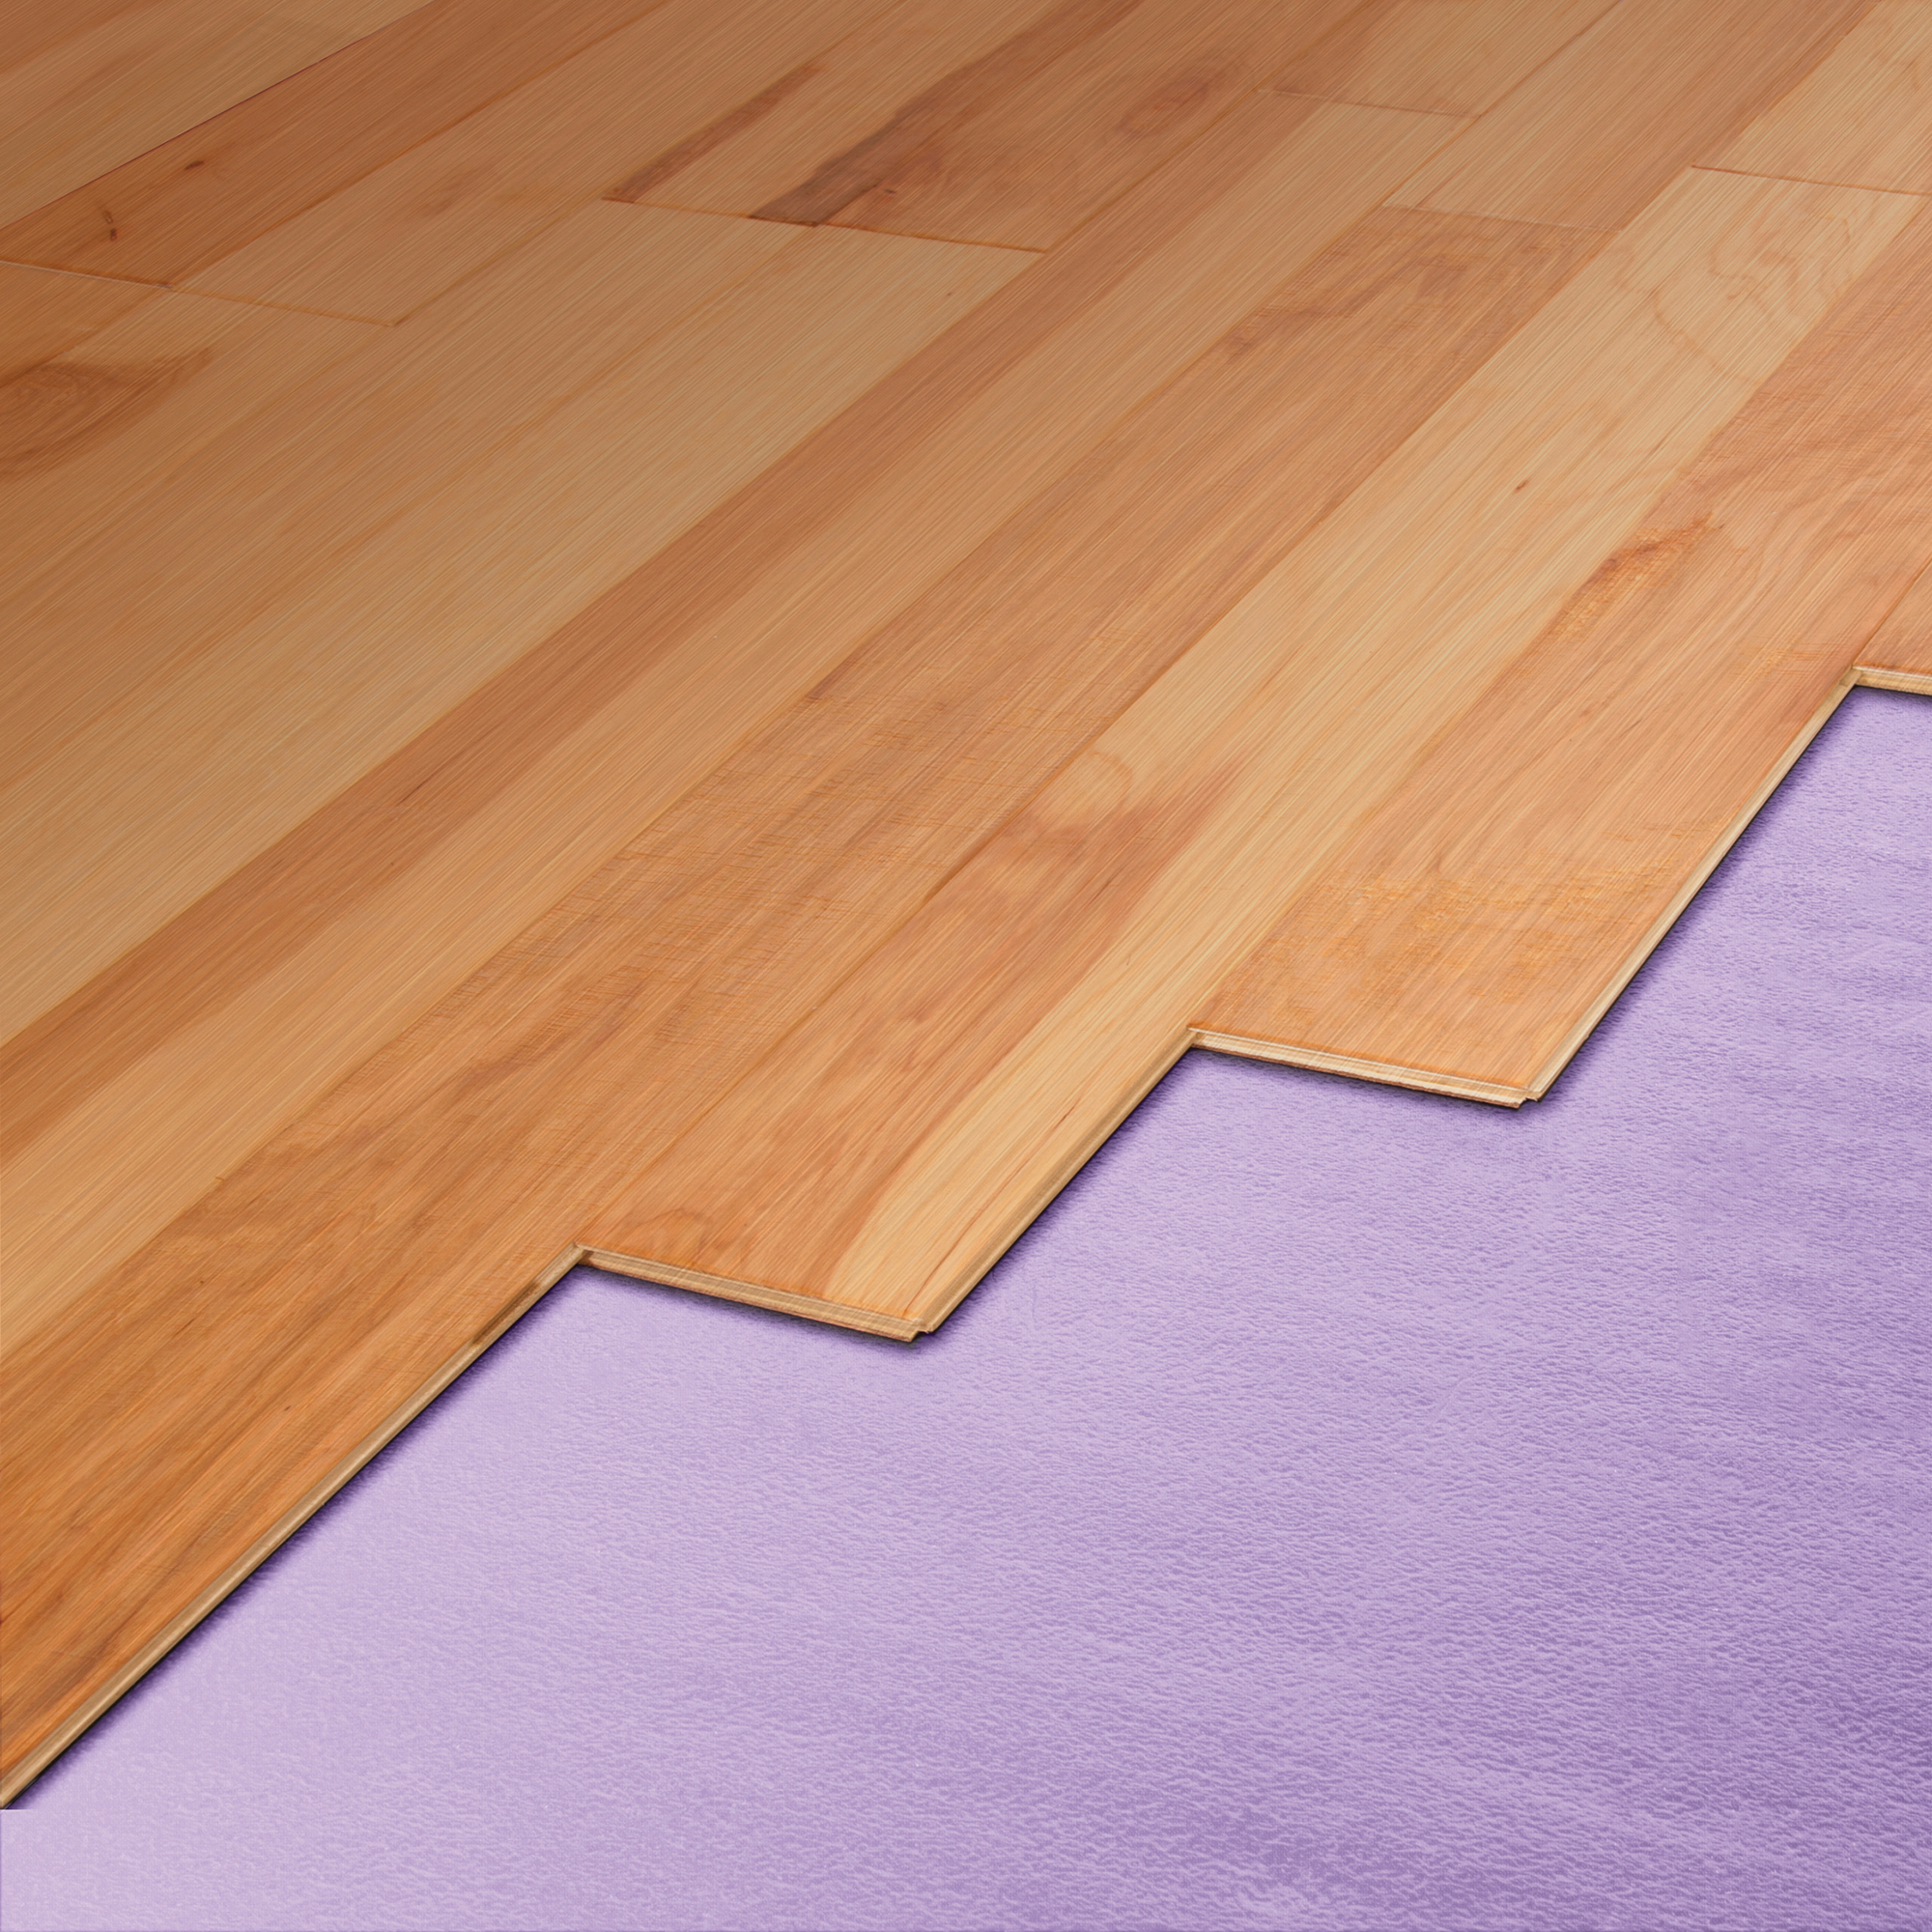 Underlayments Roberts Consolidated, Underlayment For Floating Hardwood Floors